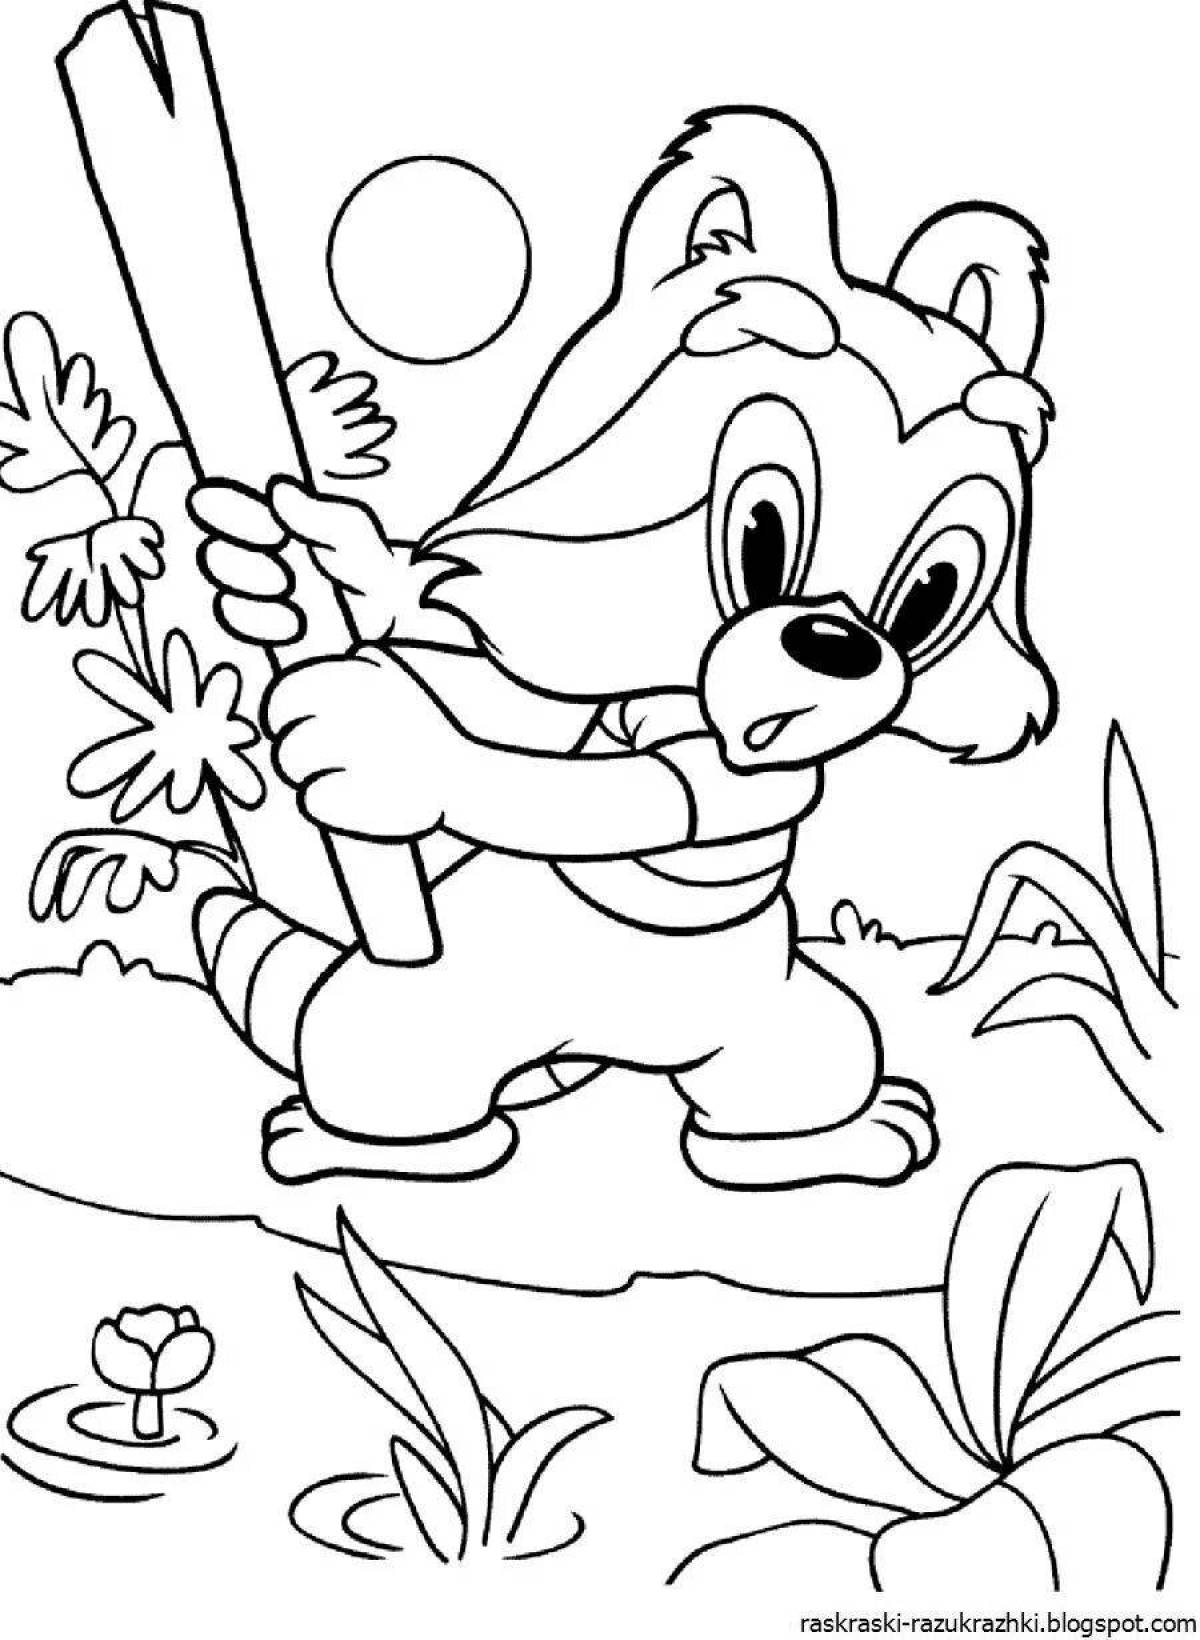 A fascinating coloring book from Soviet cartoons